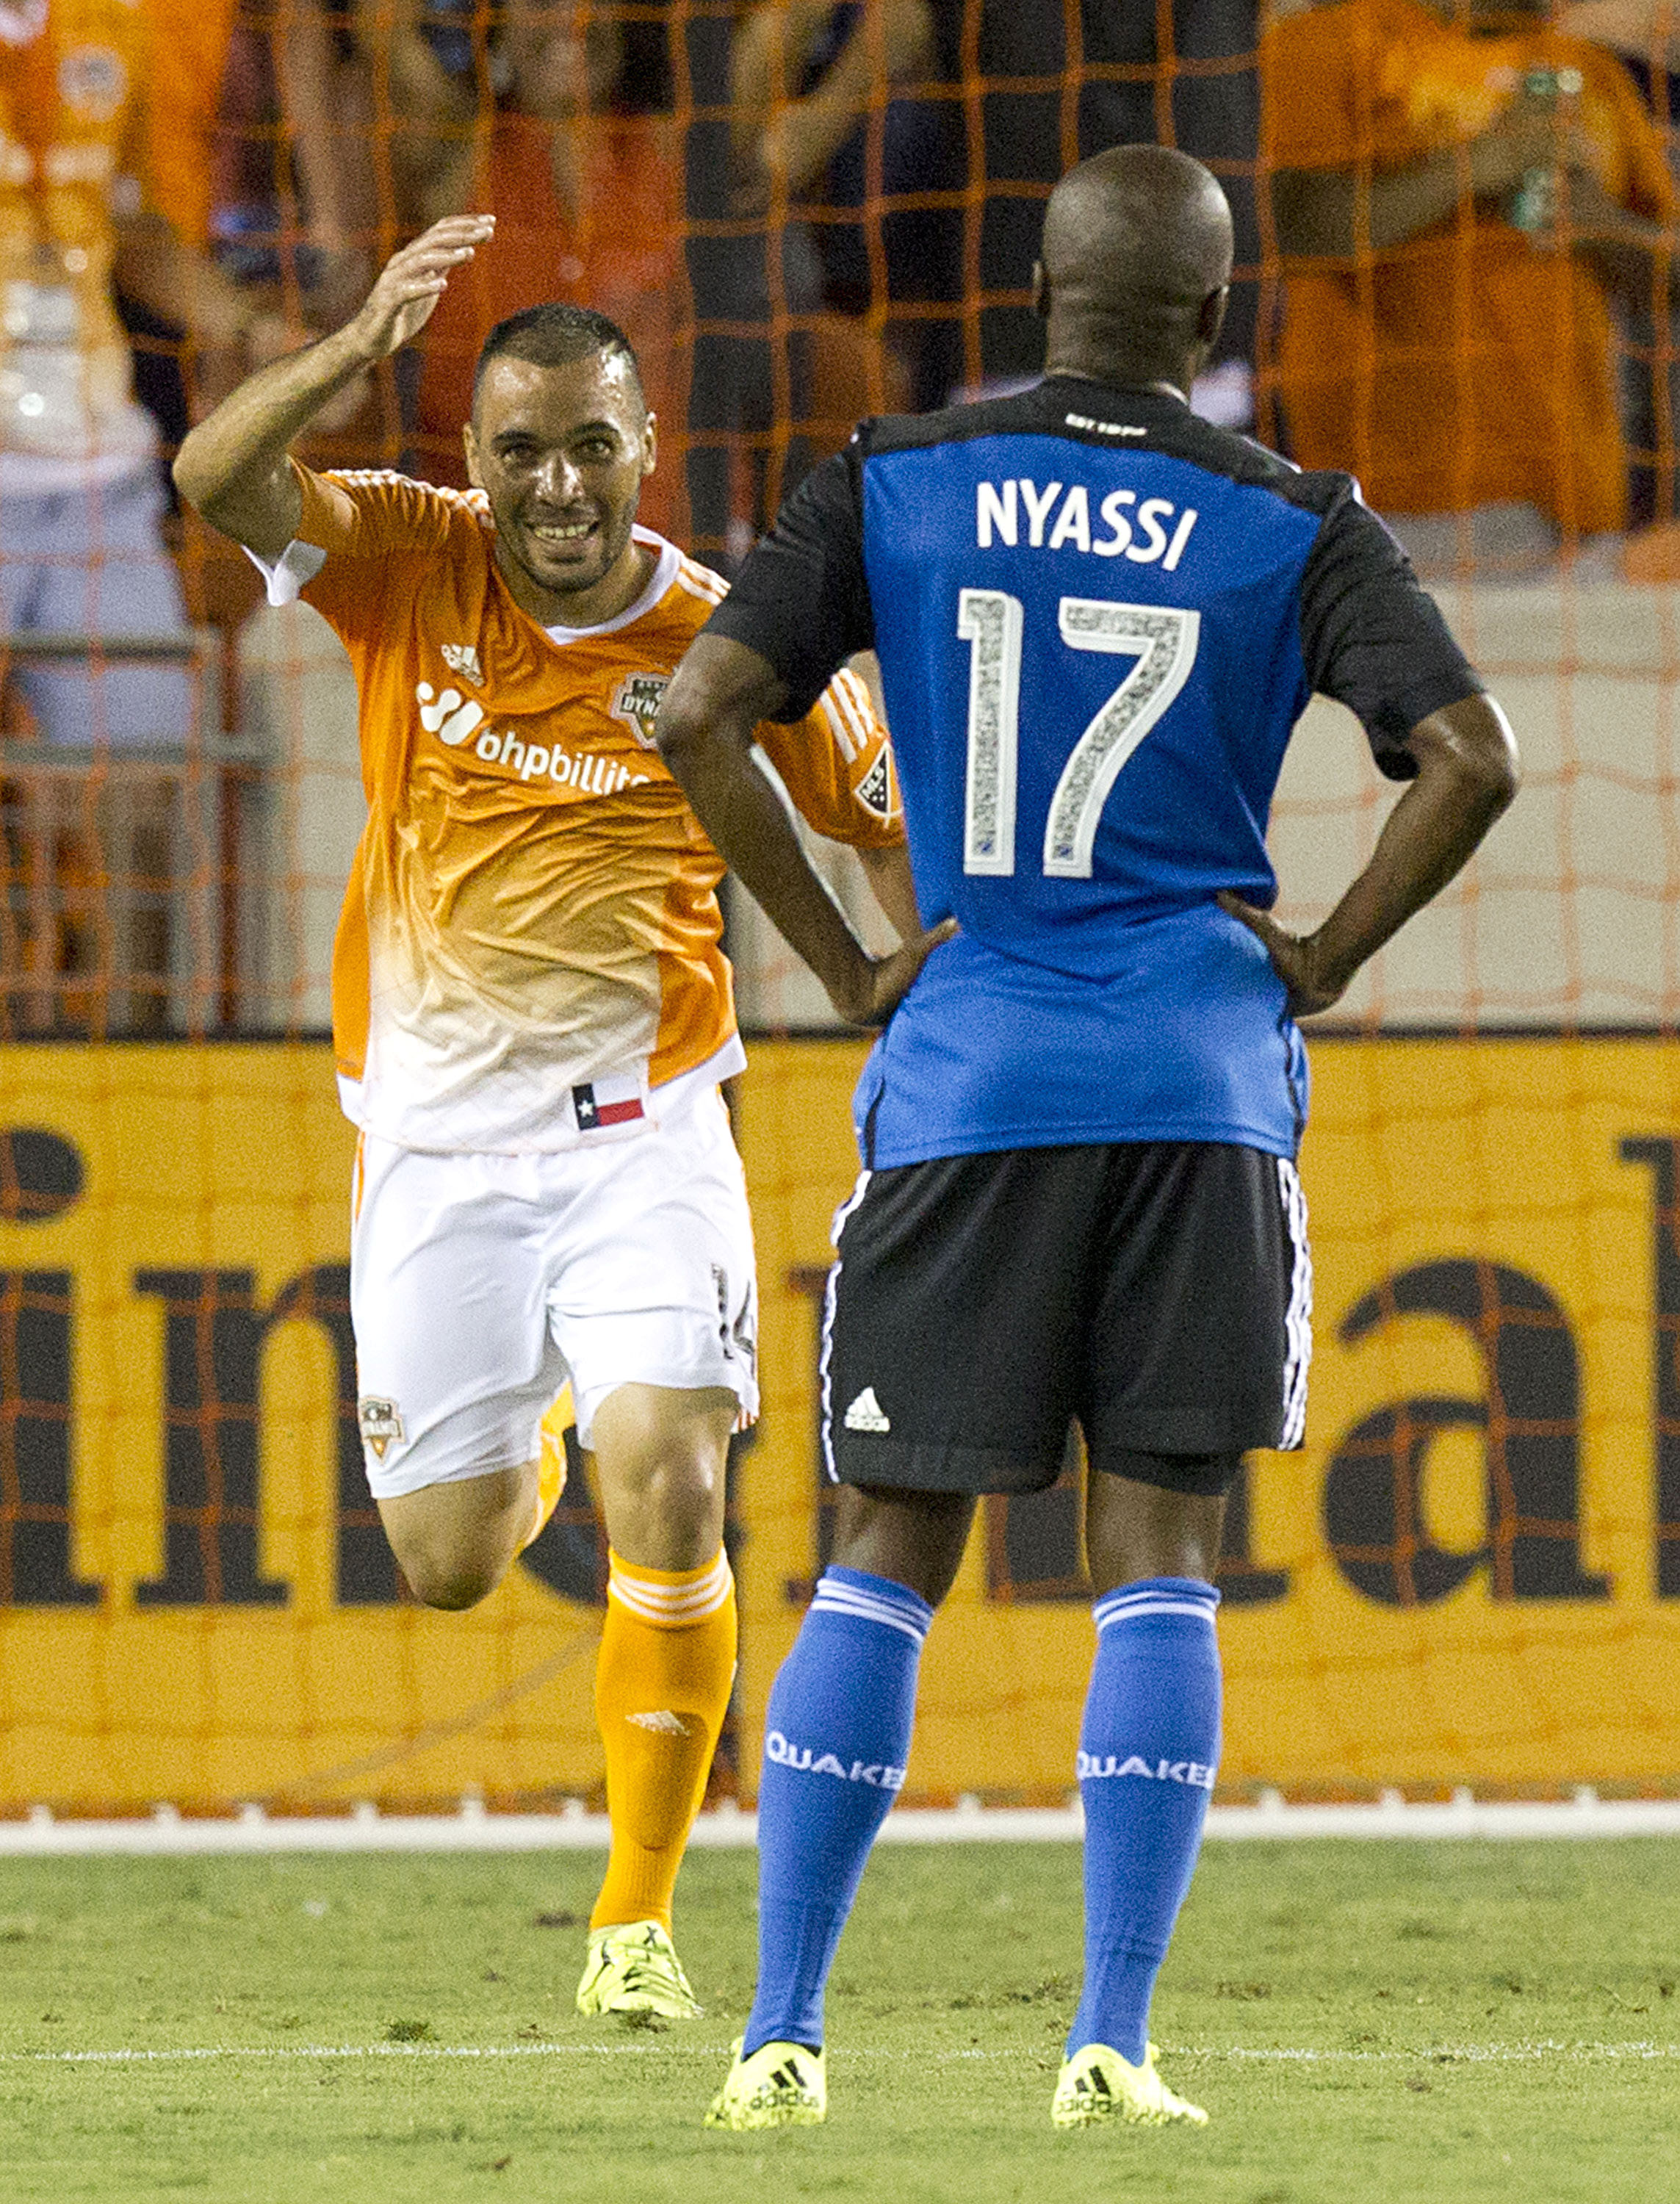 Alex's game-winner gave the Dynamo the three points they needed.